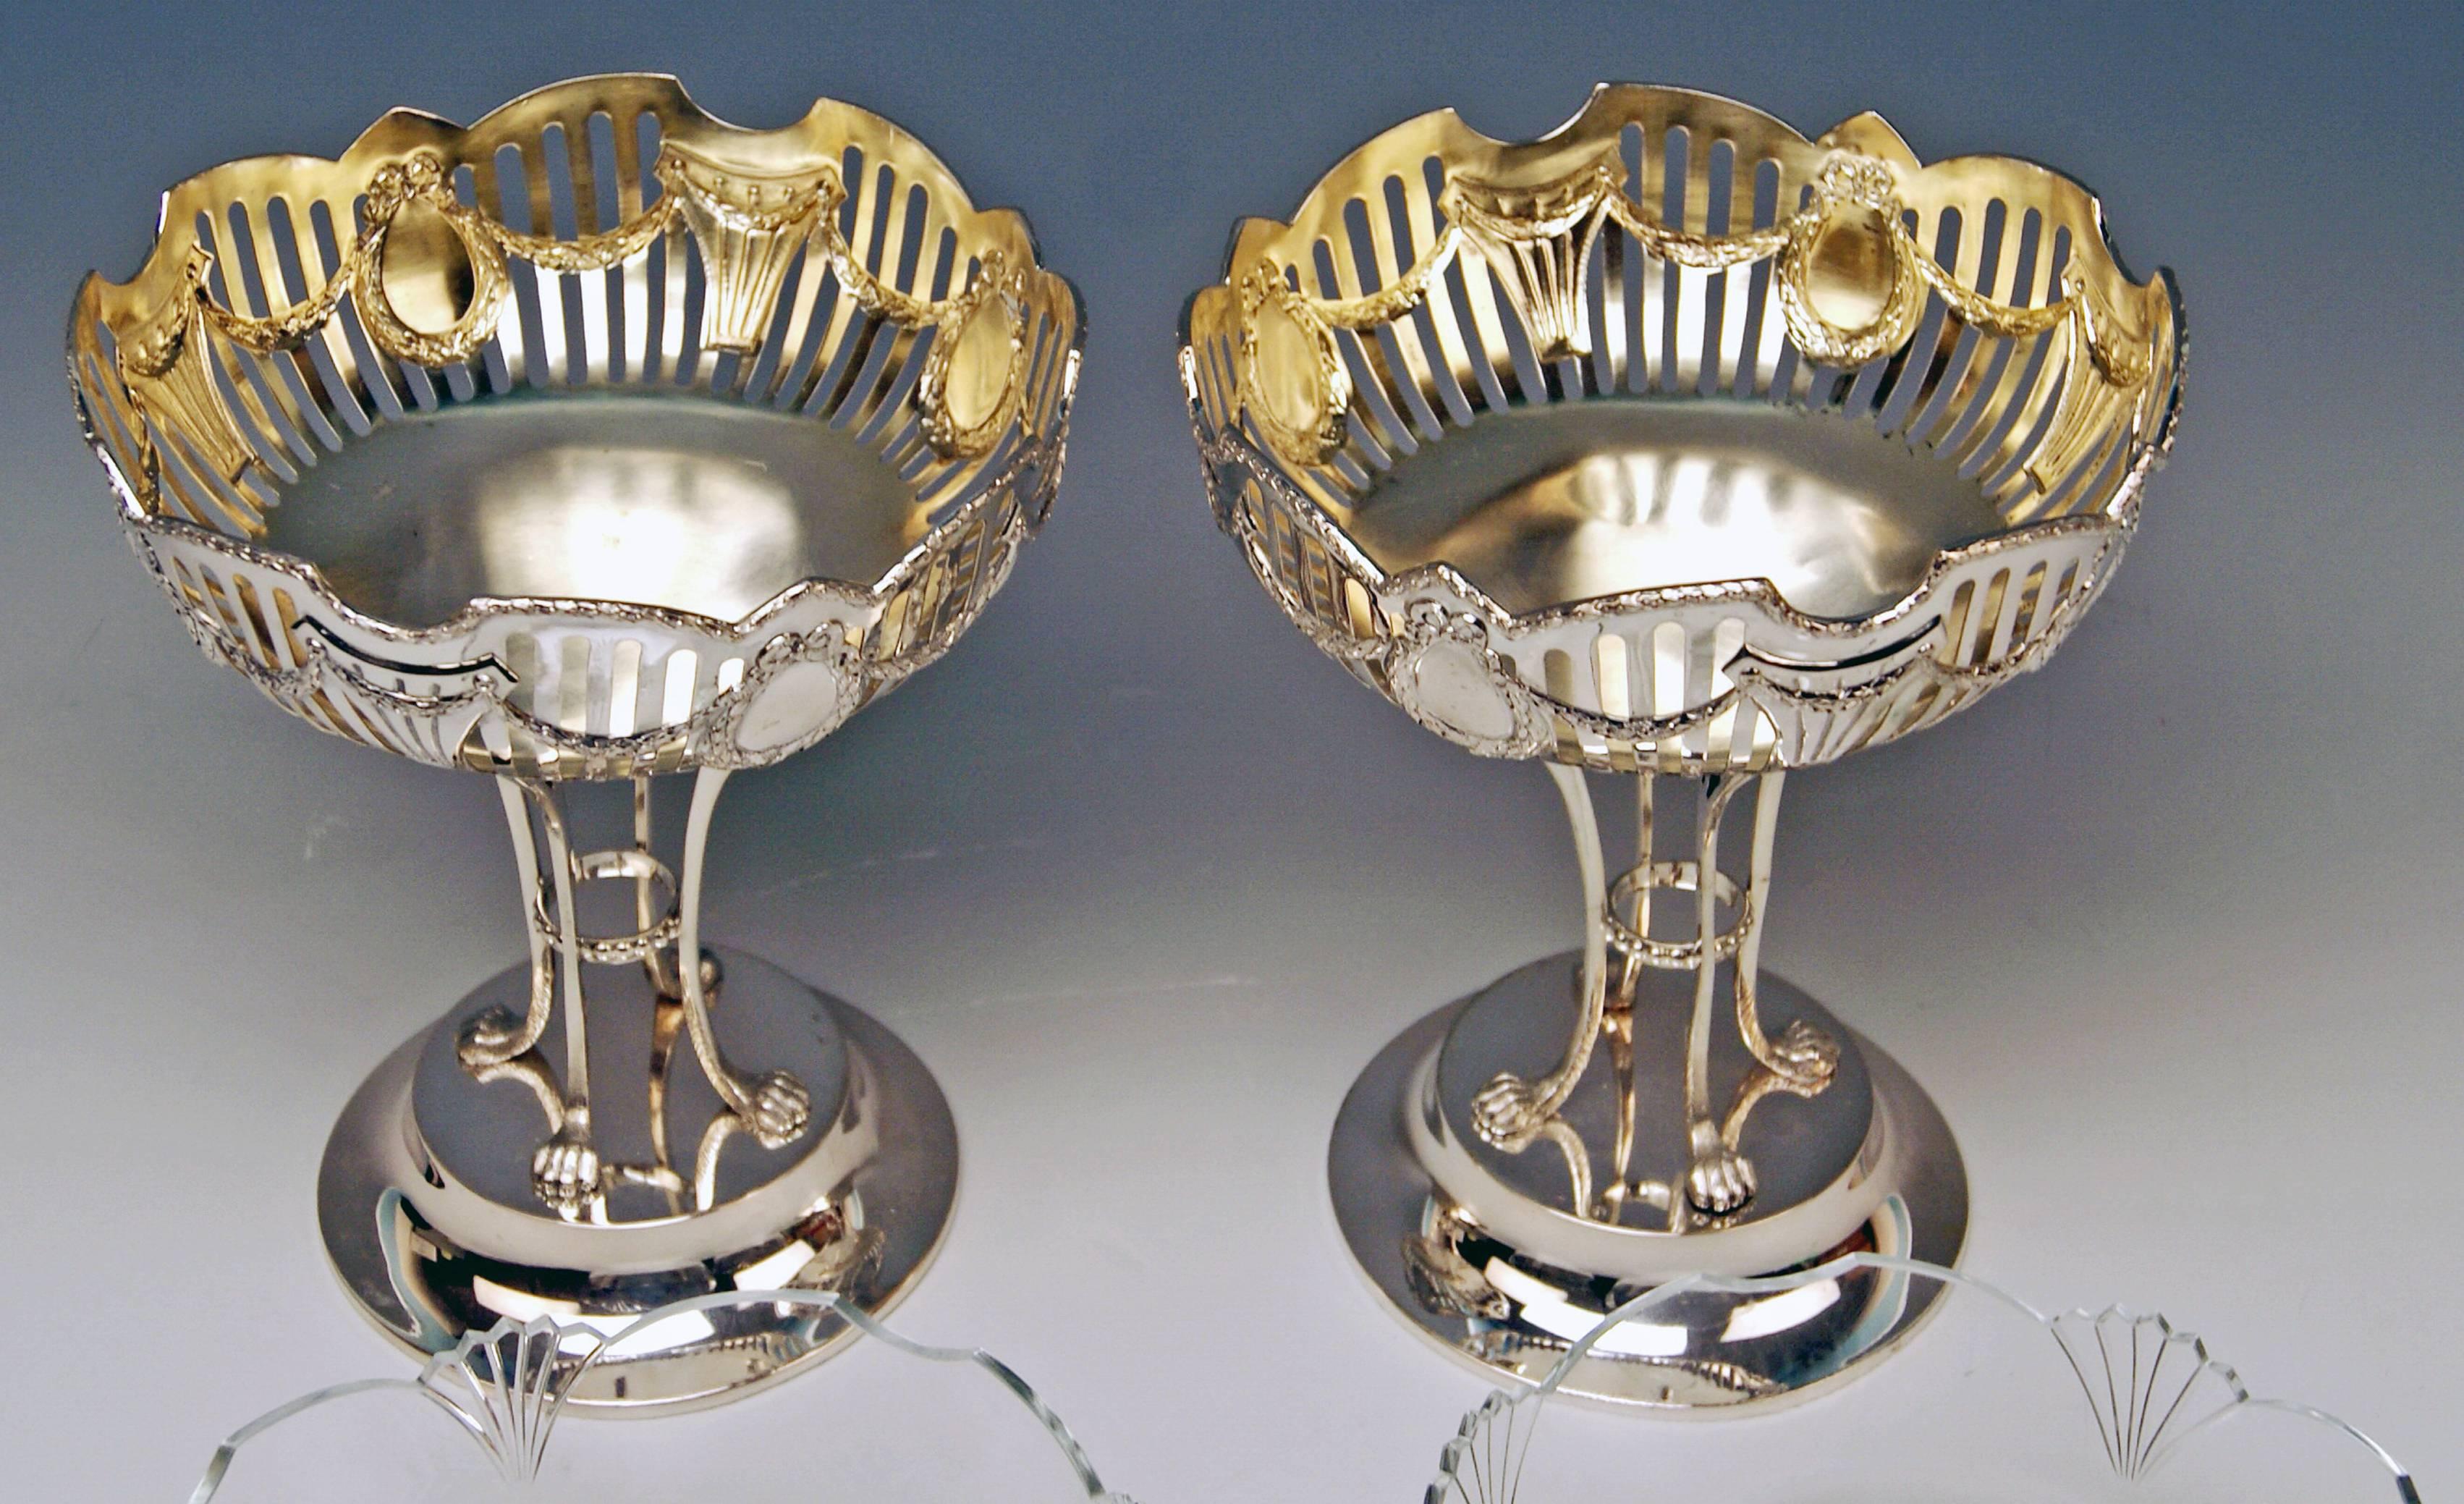 Silver Austrian gorgeous pair of fruitbowls / centrepieces of most elegant appearance.

Manufactory:
Viennese silver manufactory FERDINAND VOGL (hallmarked).
Related manufactory was once situated in Viennese 7th district (at the address